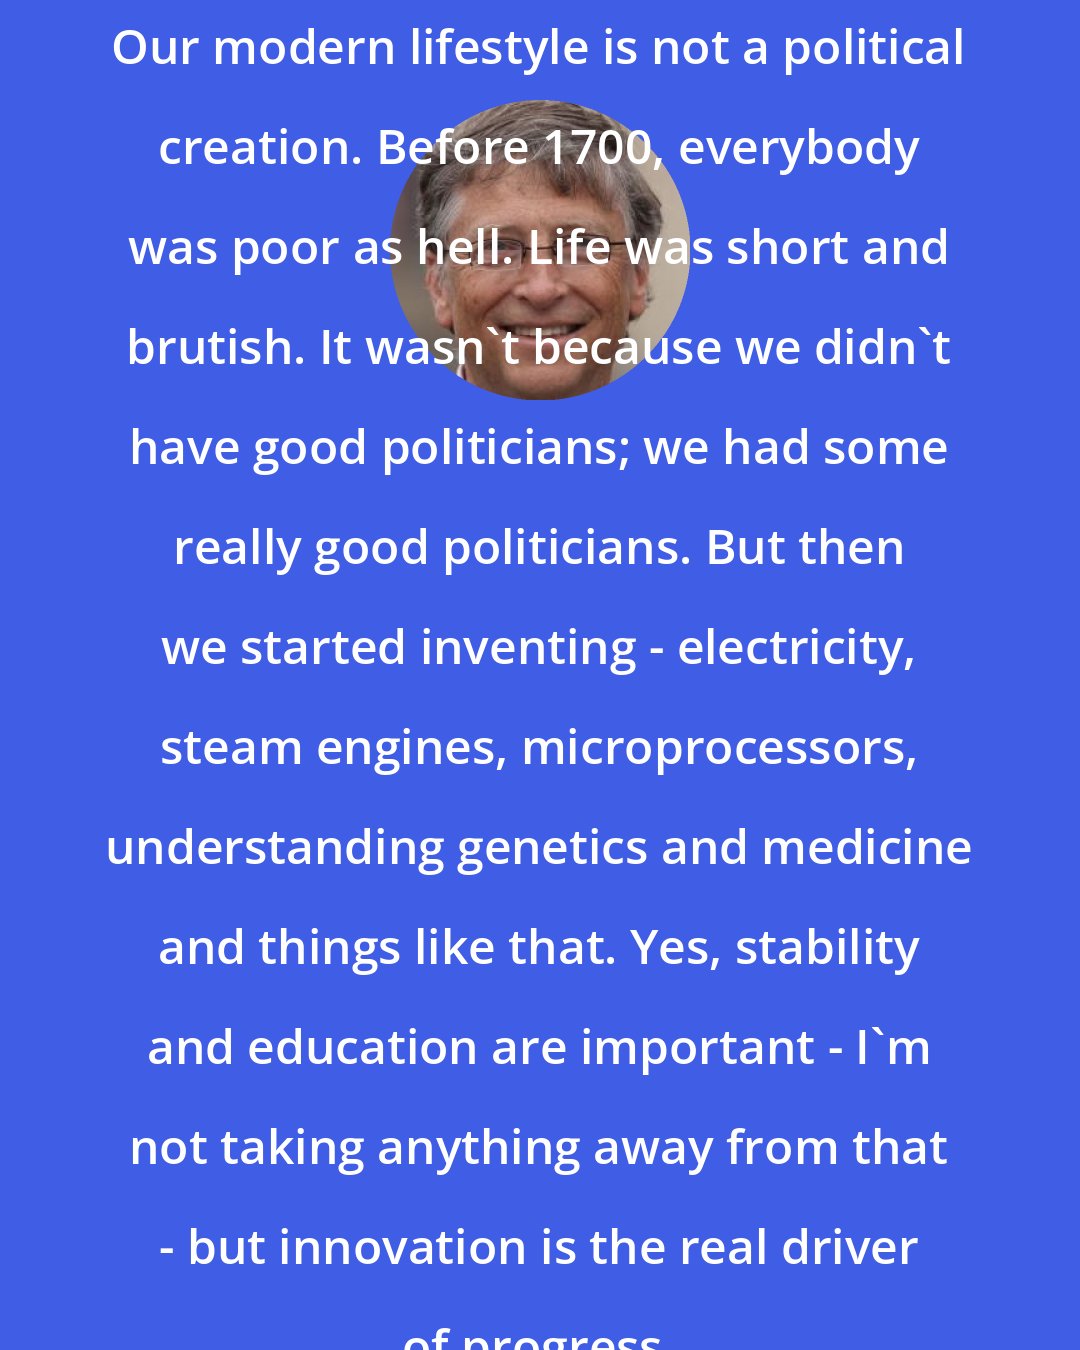 Bill Gates: Our modern lifestyle is not a political creation. Before 1700, everybody was poor as hell. Life was short and brutish. It wasn't because we didn't have good politicians; we had some really good politicians. But then we started inventing - electricity, steam engines, microprocessors, understanding genetics and medicine and things like that. Yes, stability and education are important - I'm not taking anything away from that - but innovation is the real driver of progress.